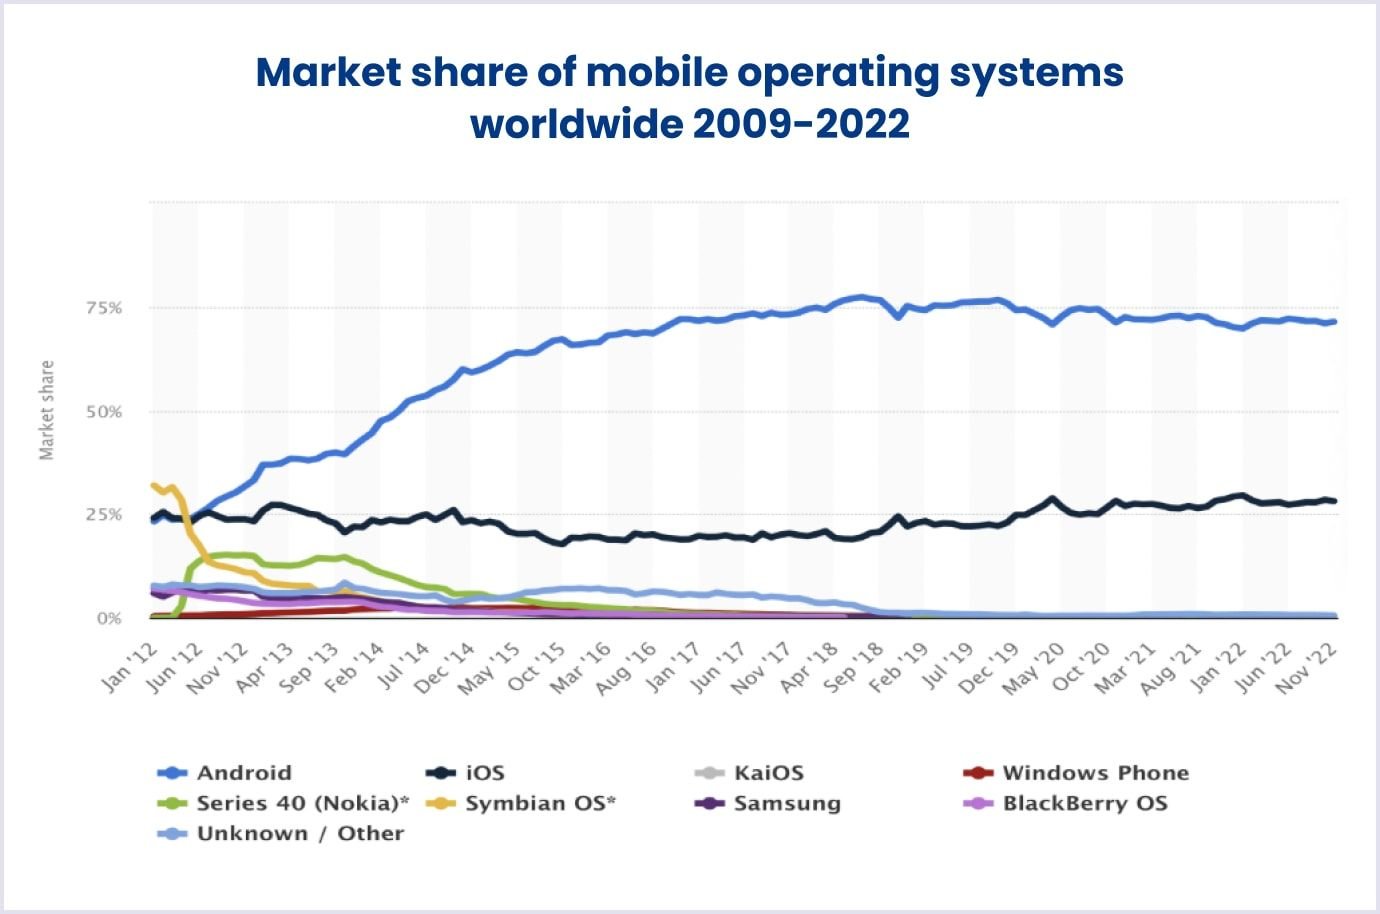 Mobile operating systems worldwide from 2009 to 2022